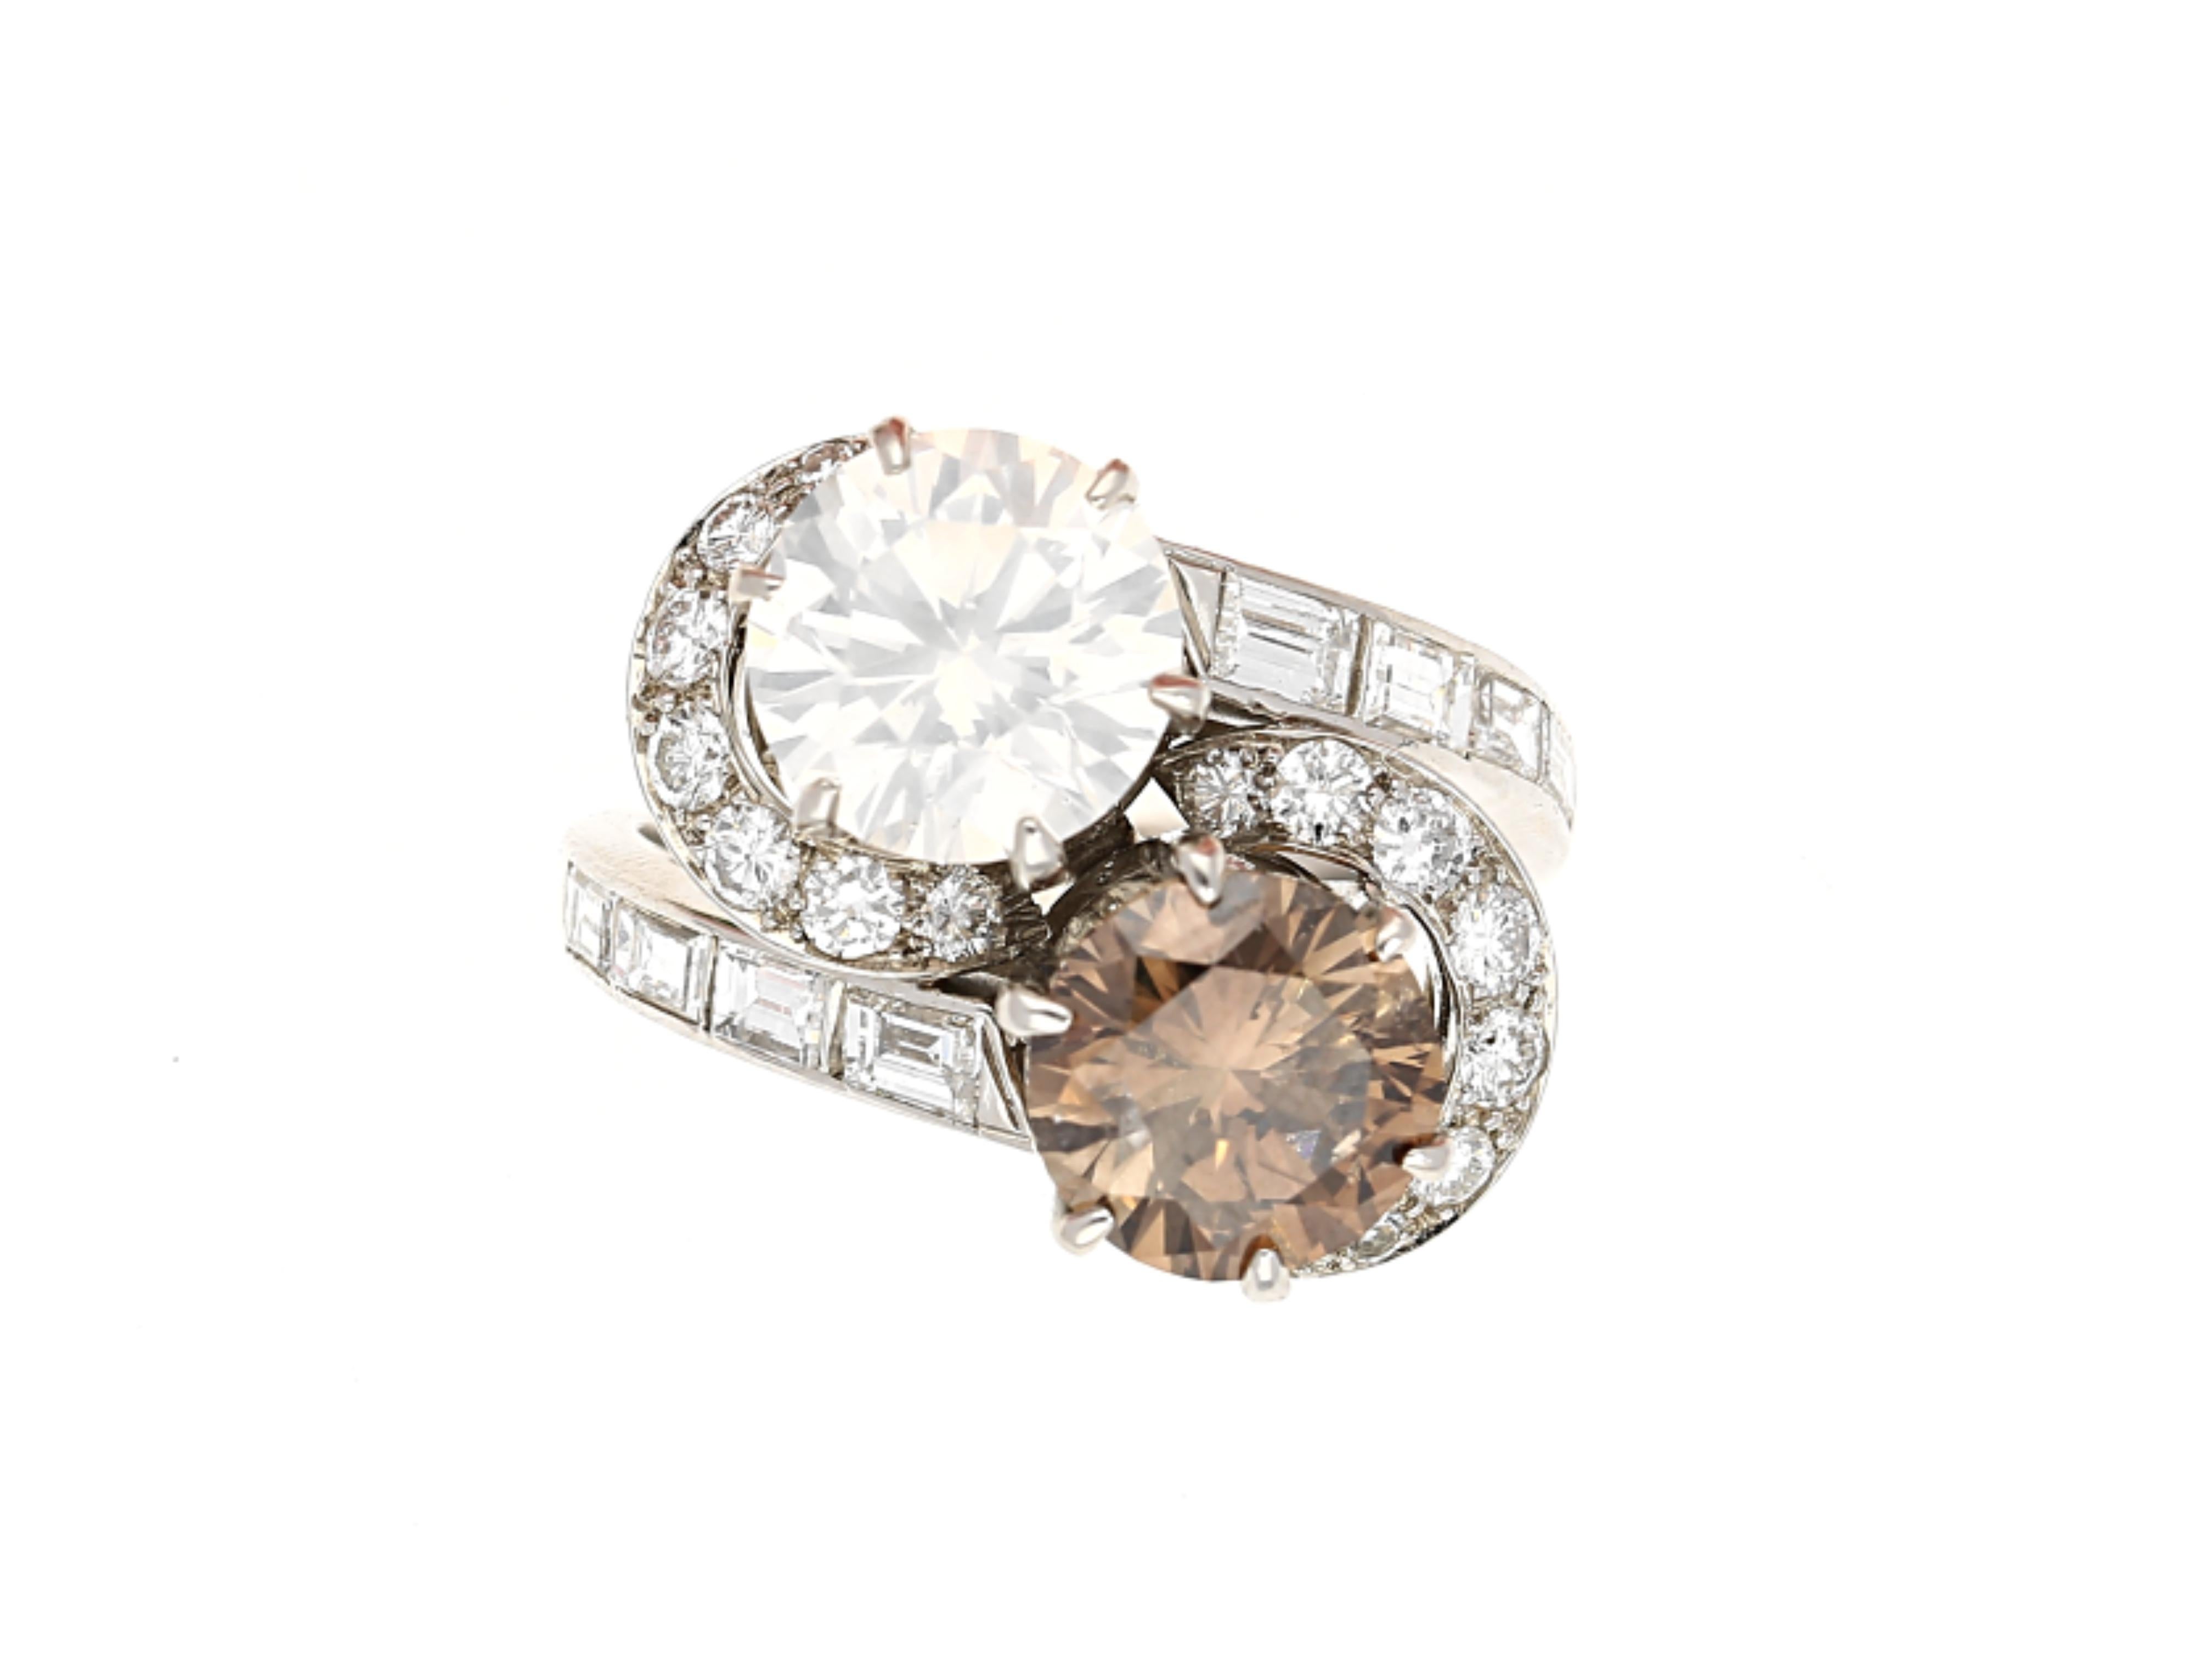 Experience the epitome of luxury and elegance - a GIA-certified Toi et Moi round-cut fancy brown and white diamond ring set in platinum. This exquisite ring is a true masterpiece, crafted with unparalleled skill and attention to detail. French for